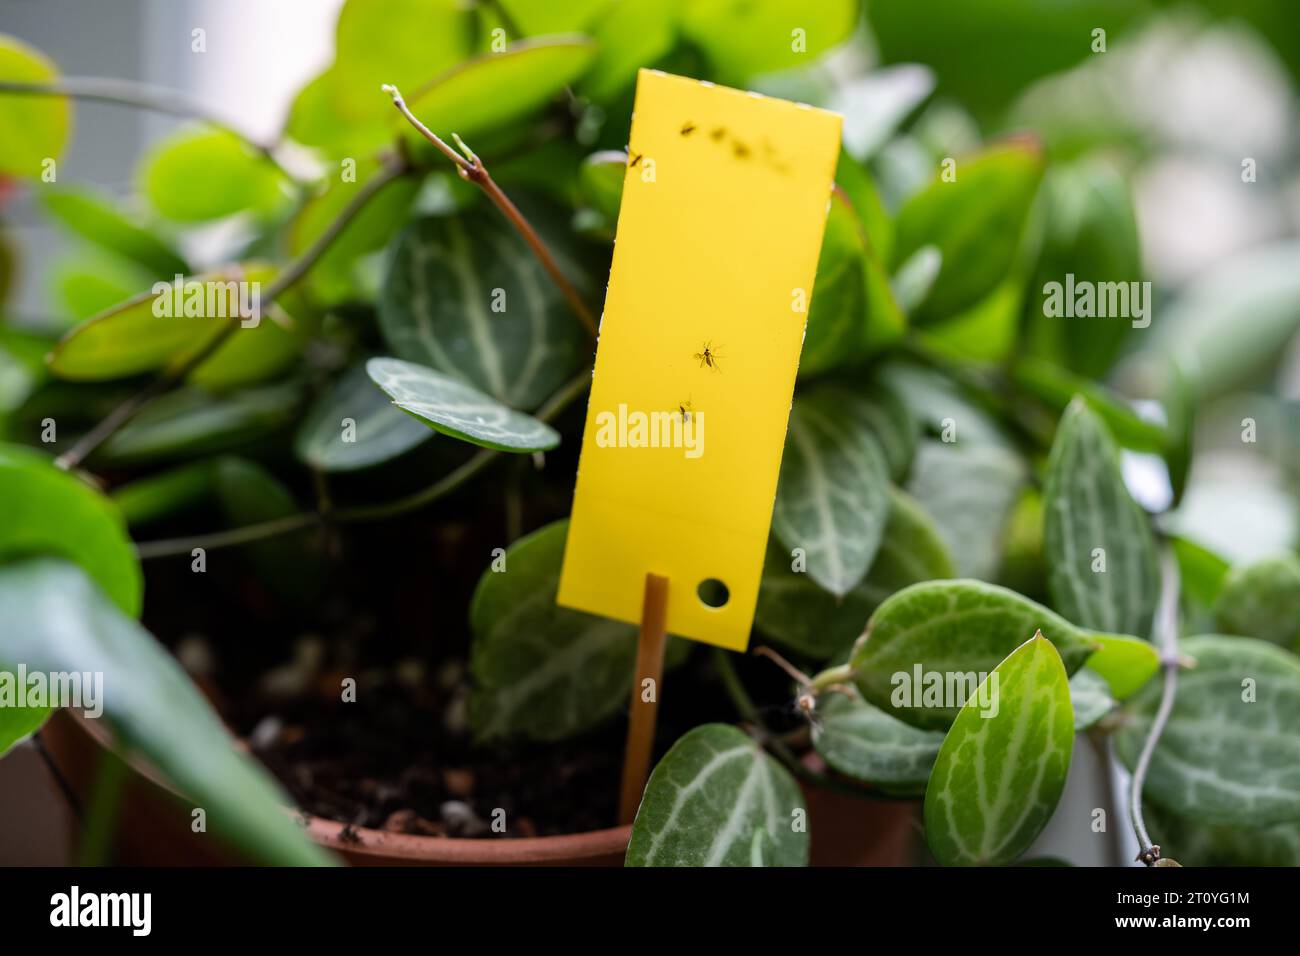 https://c8.alamy.com/comp/2T0YG1M/fungus-gnats-stuck-on-yellow-sticky-trap-flypaper-for-sciaridae-insect-pests-around-houseplant-2T0YG1M.jpg